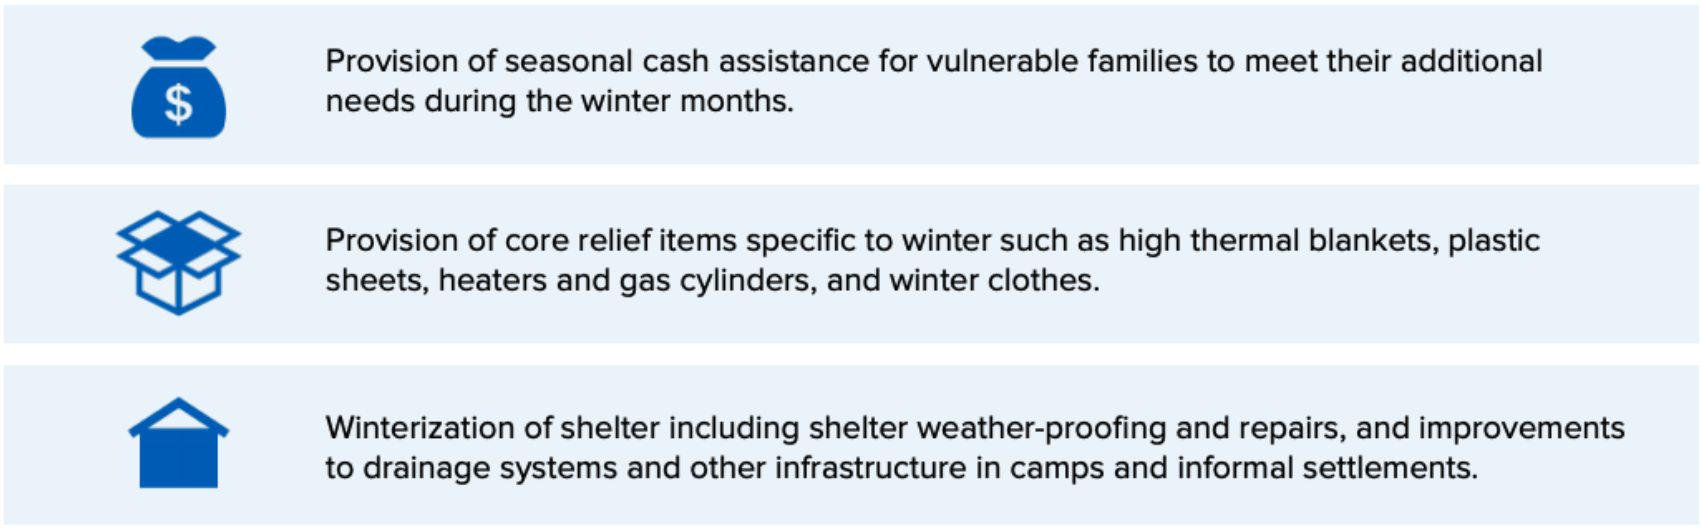 Provision of seasonal cash assistance, provision of core relief items, winterization of shelter